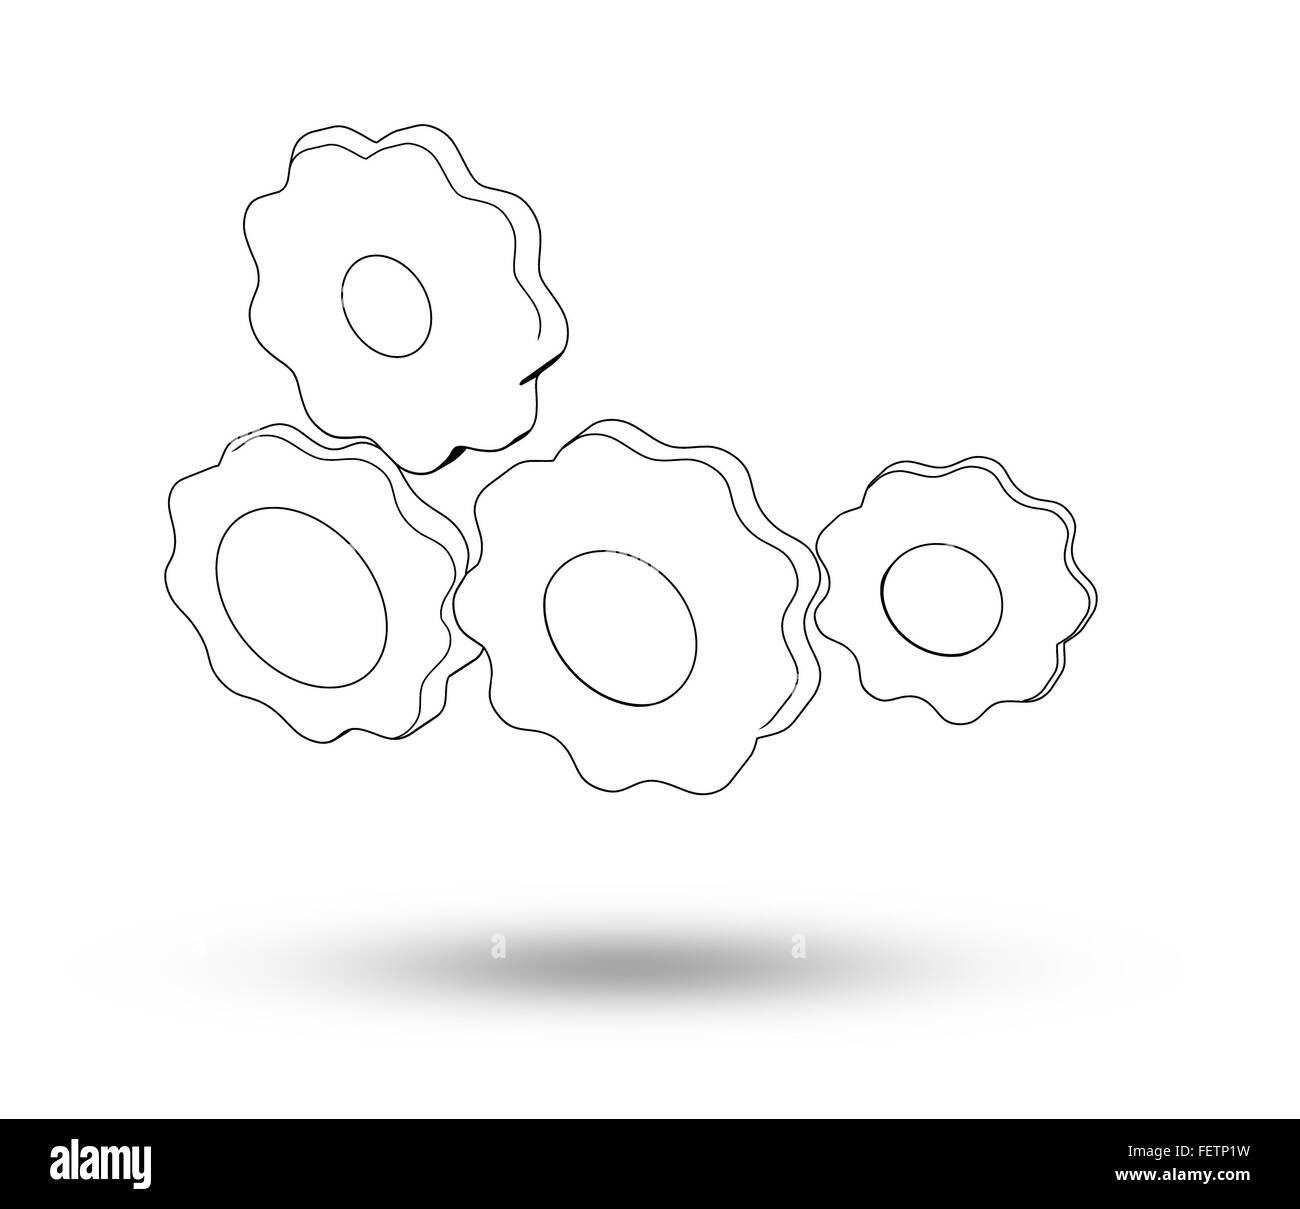 Drawing gears working Stock Photo